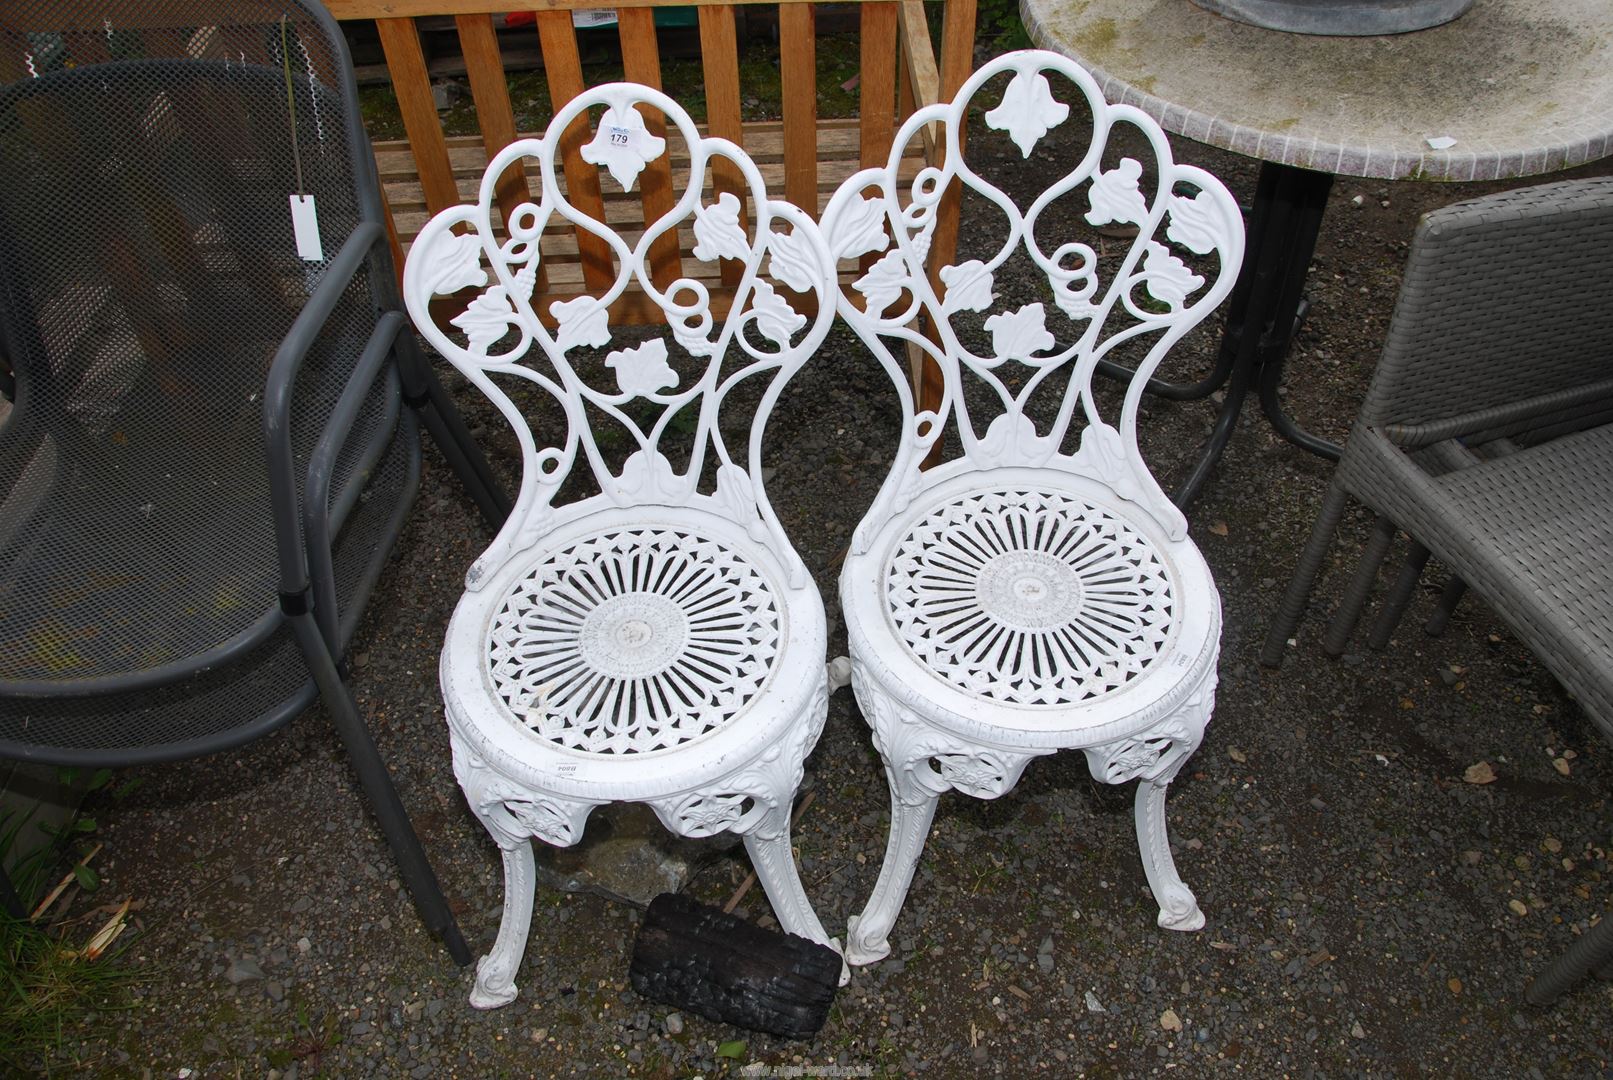 A pair of aluminium chairs with leaf detail.